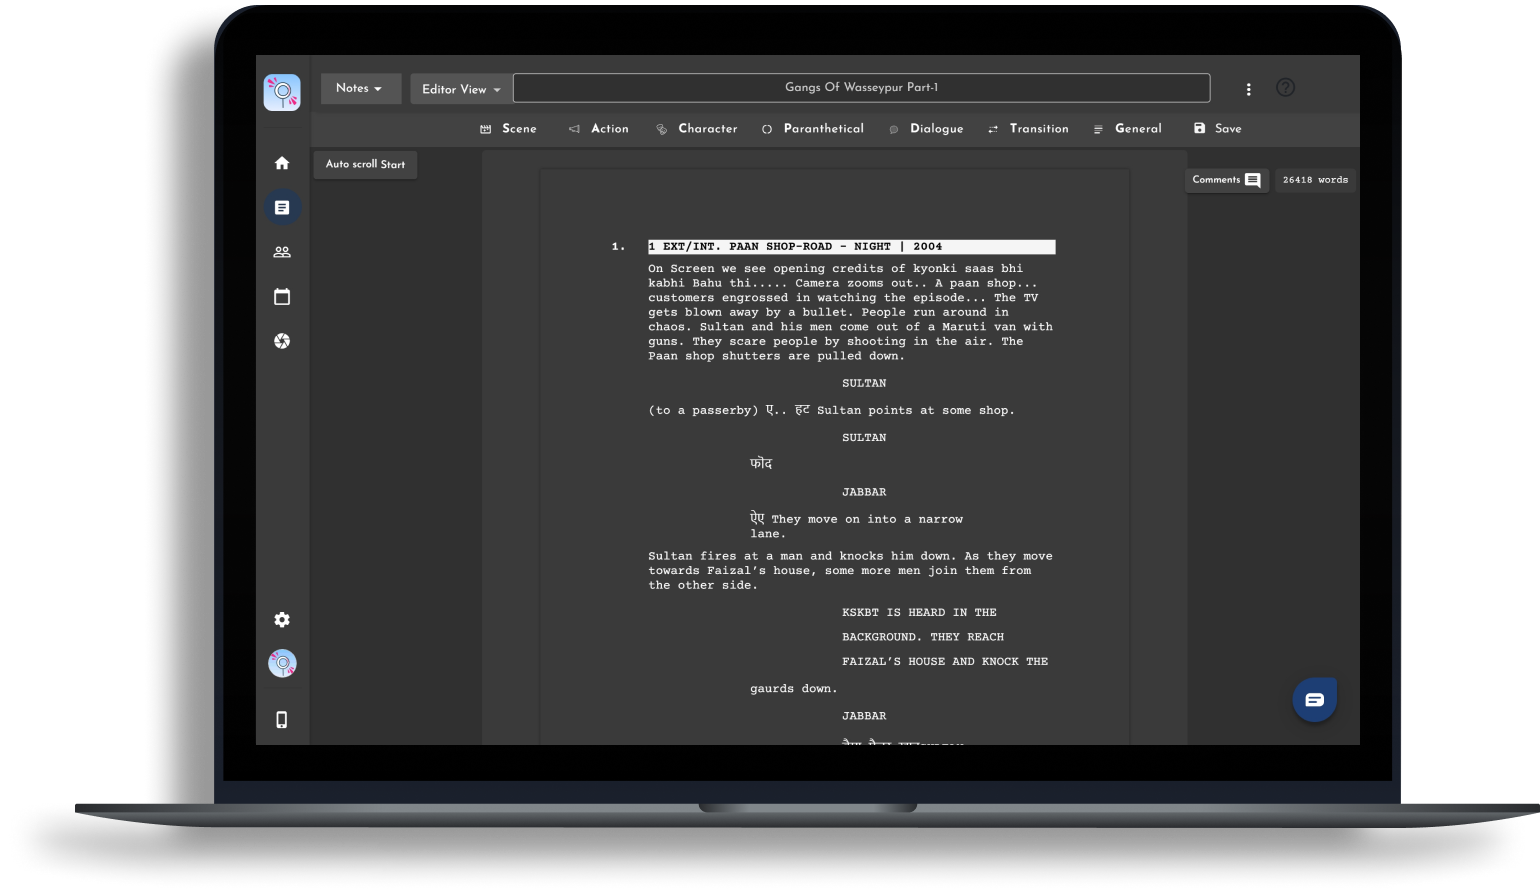 how-to-format-a-screenplay-a-detailed-guide-studiovity